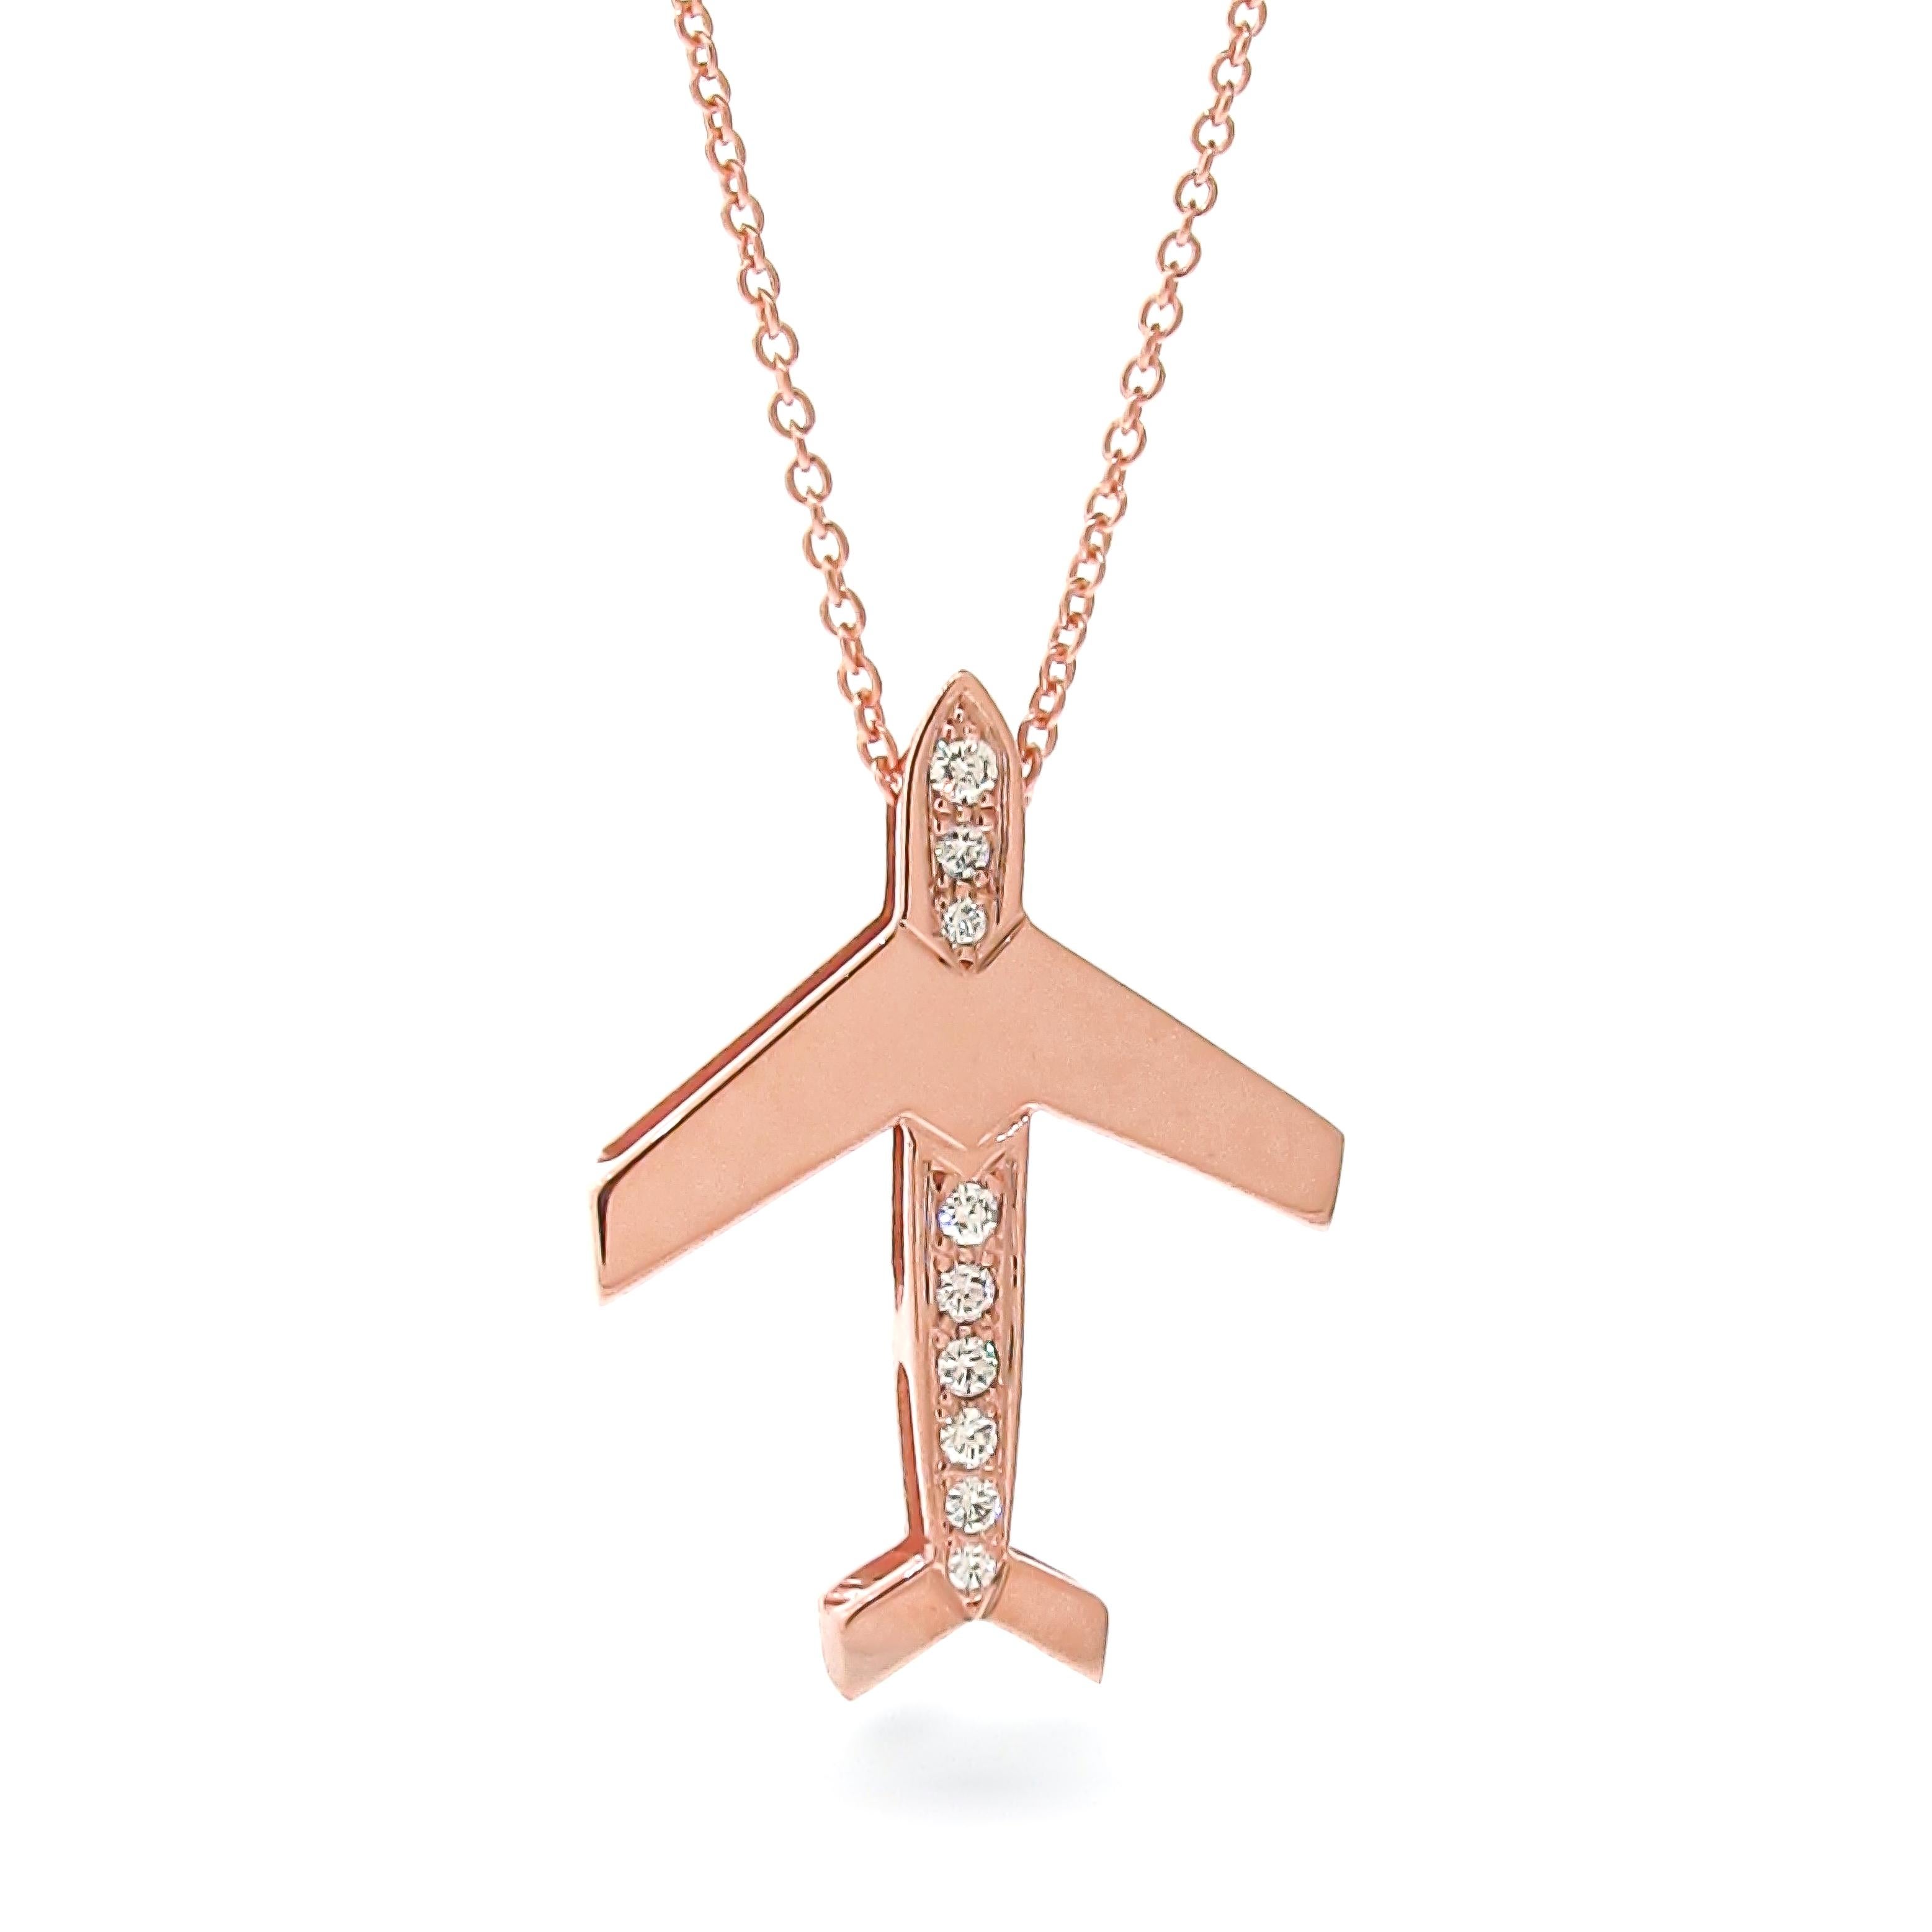 Introducing our exquisite Solid 9k Rose Gold Diamond Large Airplane Necklace, a captivating piece that combines elegance and symbolism. This pendant is paired with a 1.4mm thick solid 9k gold cable chain, and embodies the spirit of aviation and